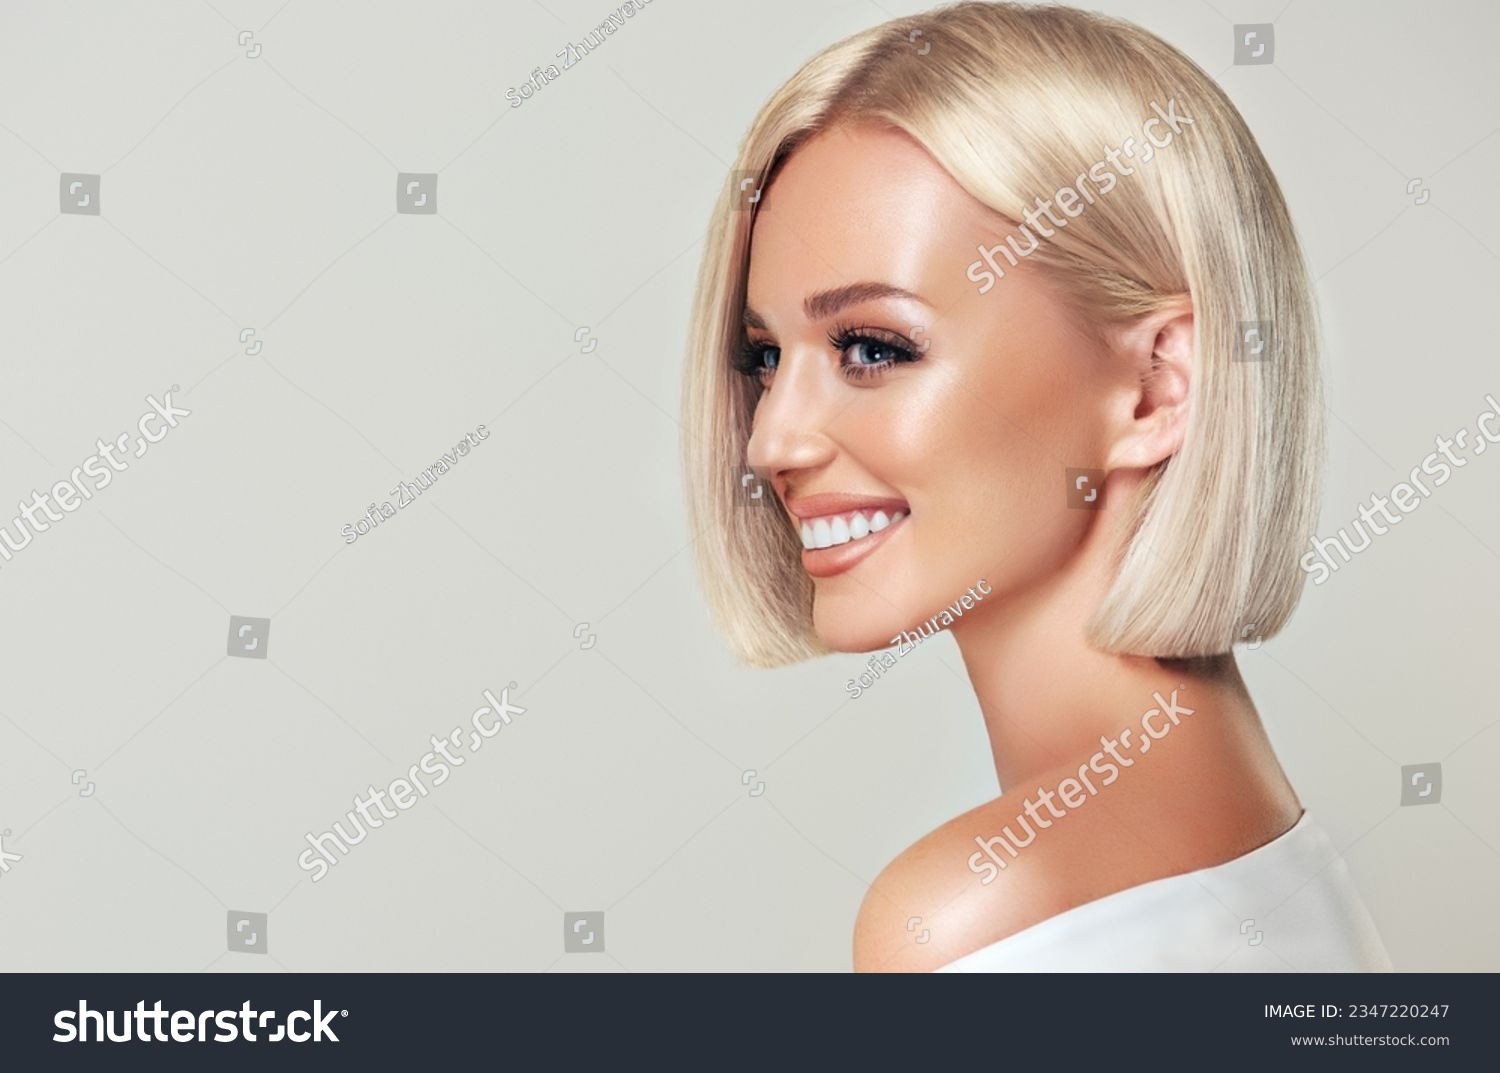 Beautiful model girl with short straight hair .Beauty woman with blonde Bob   hairstyle  .Fashion, cosmetics and makeup #2347220247